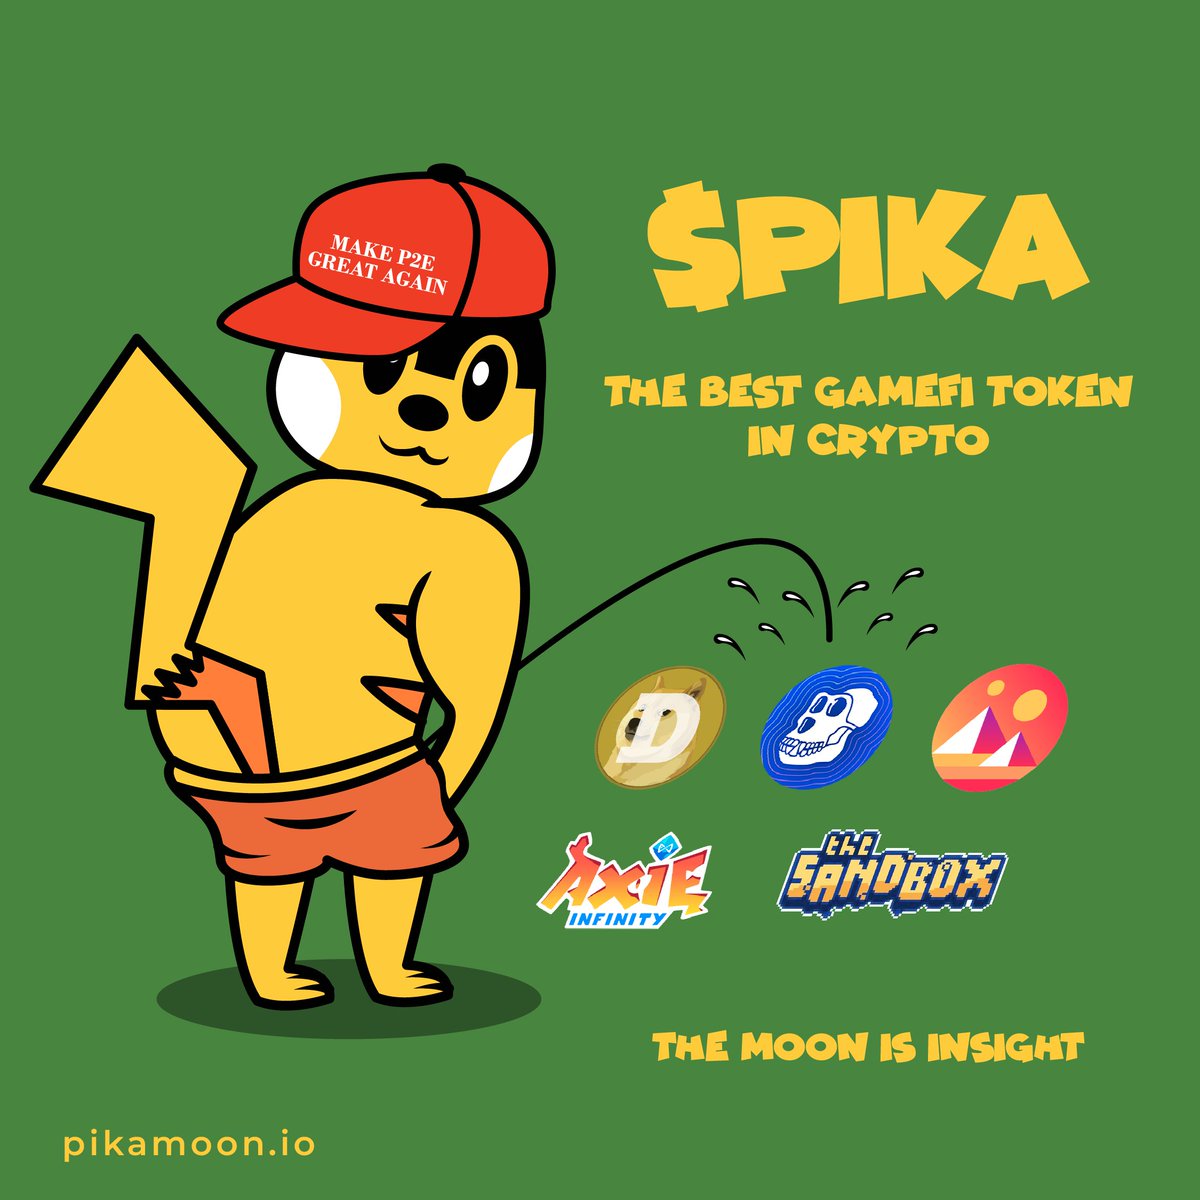 Community is KING, and #Pikamoon has it in abundance! Backed by stats, this thread explains why the #PikaArmy is putting the likes of Illuvium, Axie Infinity, and The Sandbox to shame when it comes to community engagement. $200 GIVEAWAY - Follow @Pikamoonarmy / RT / LIKE 🧵⬇️